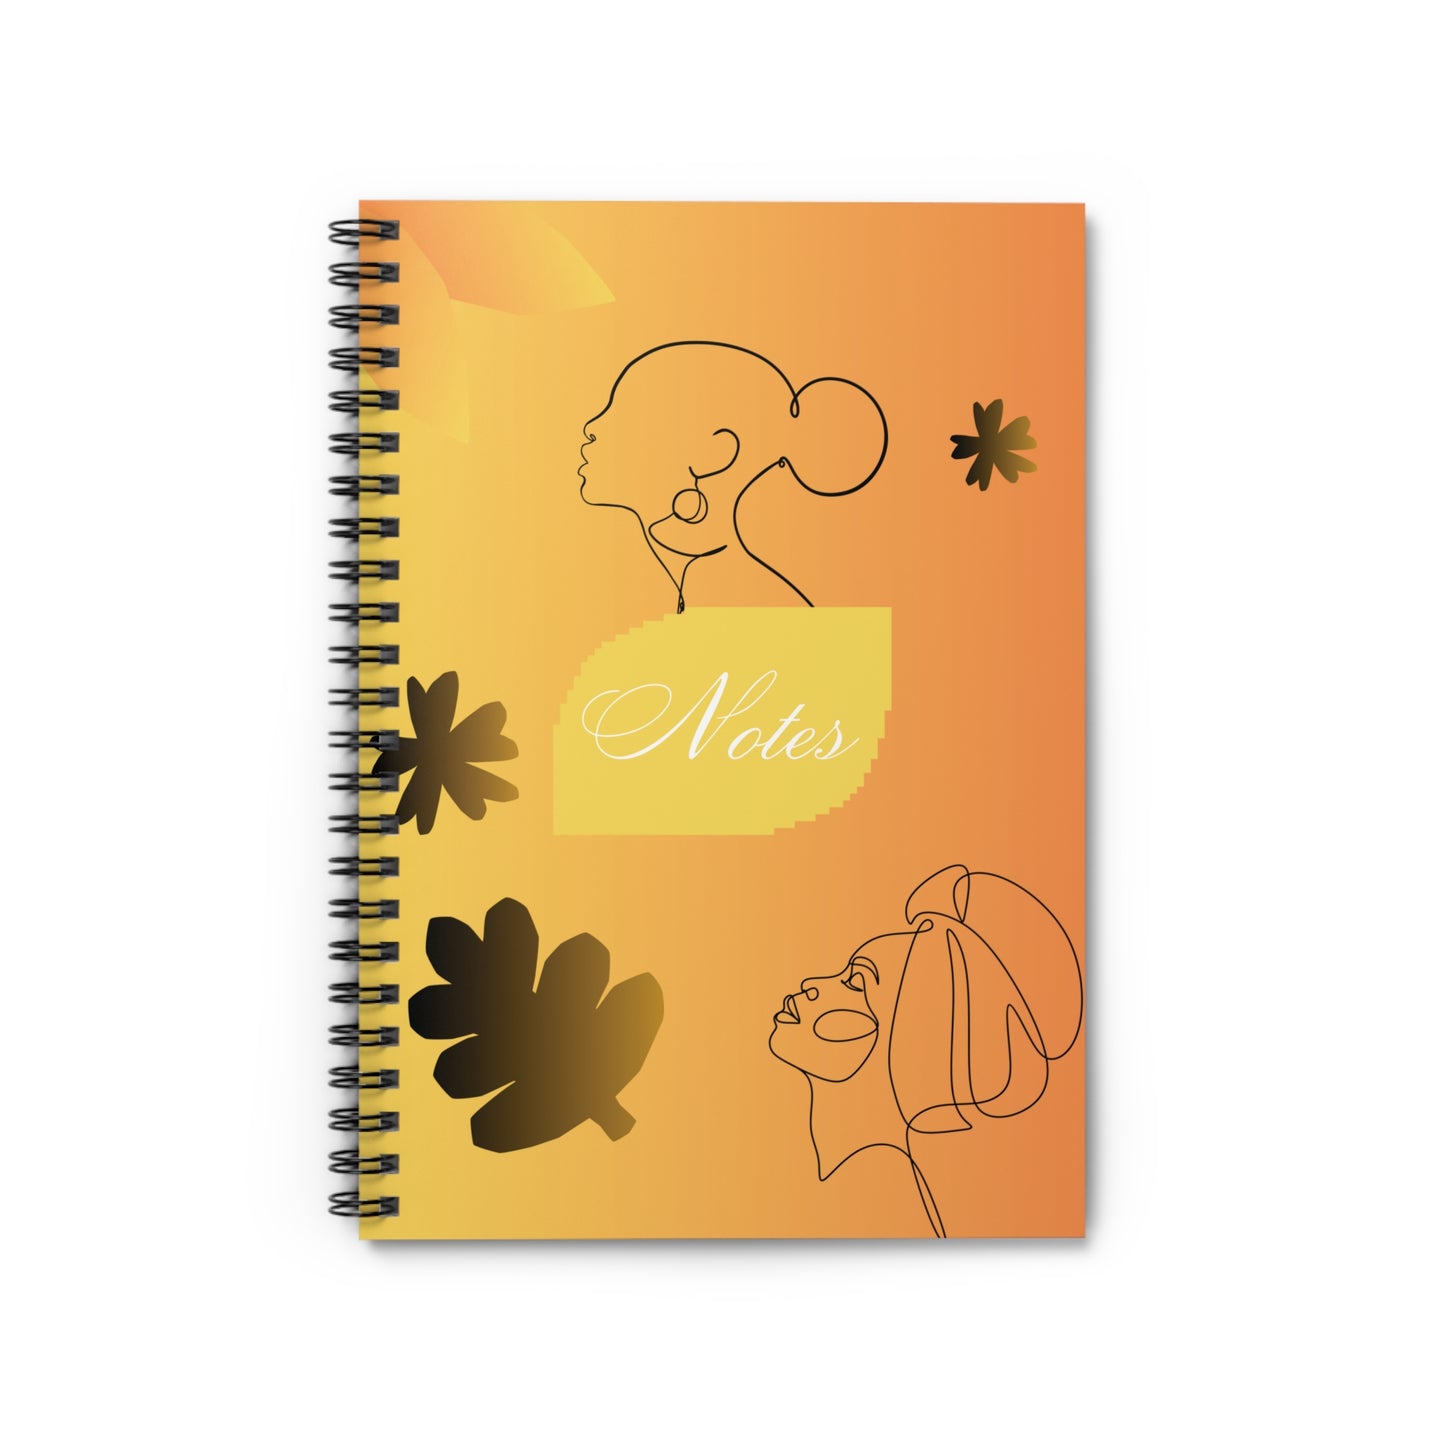 Amber Spiral Notebook - College Ruled Lines 6"x8"